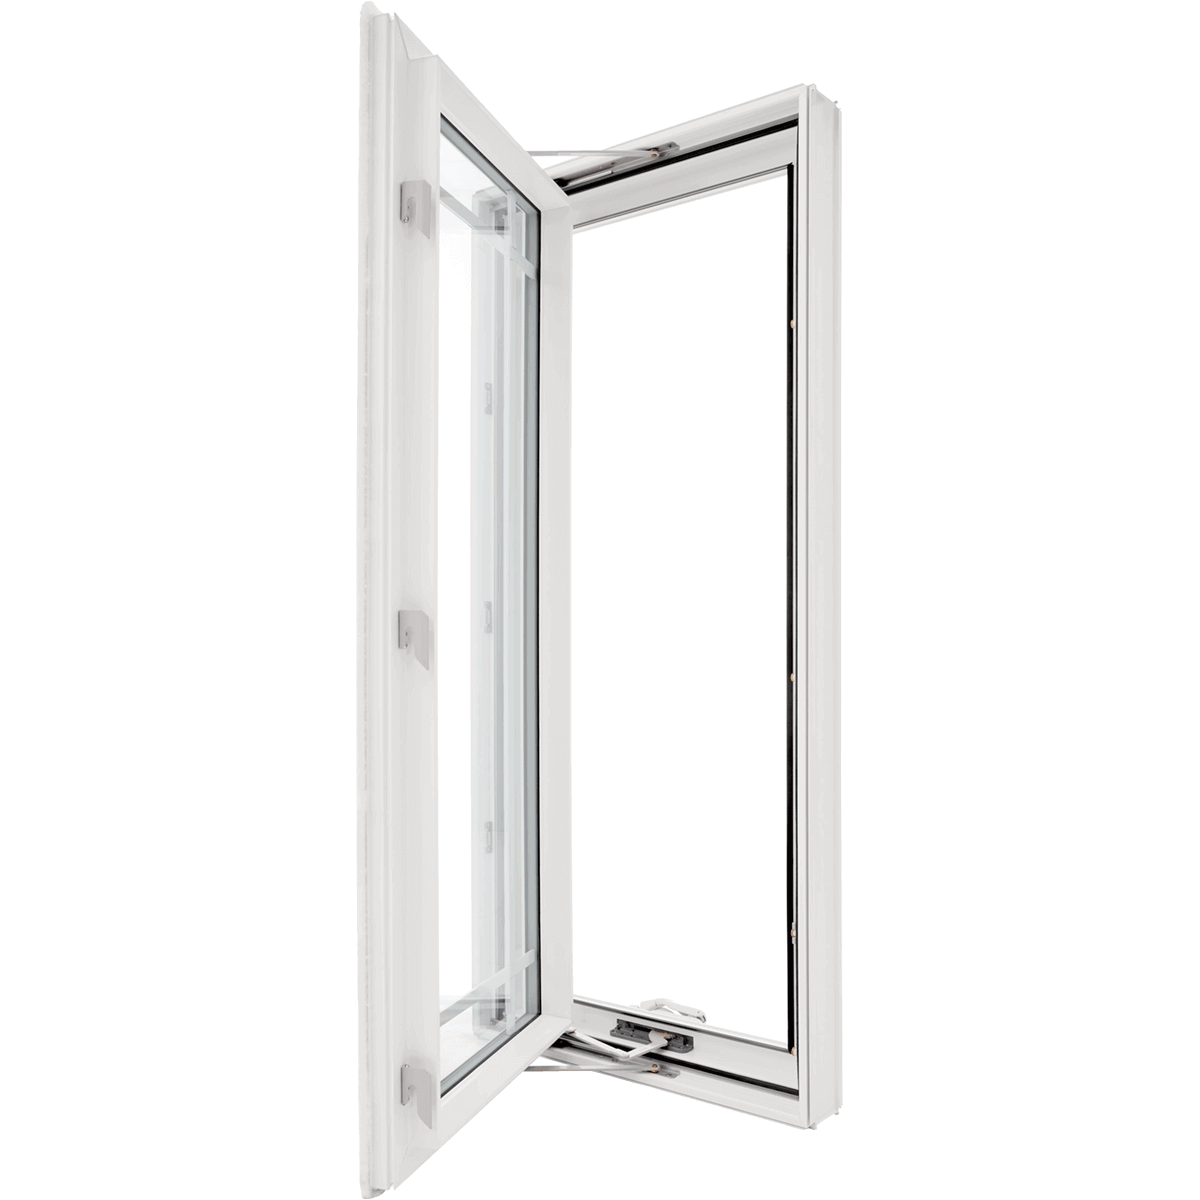 Casement windows are hinged on one side and swing open like a door, providing unobstructed views and excellent ventilation control.